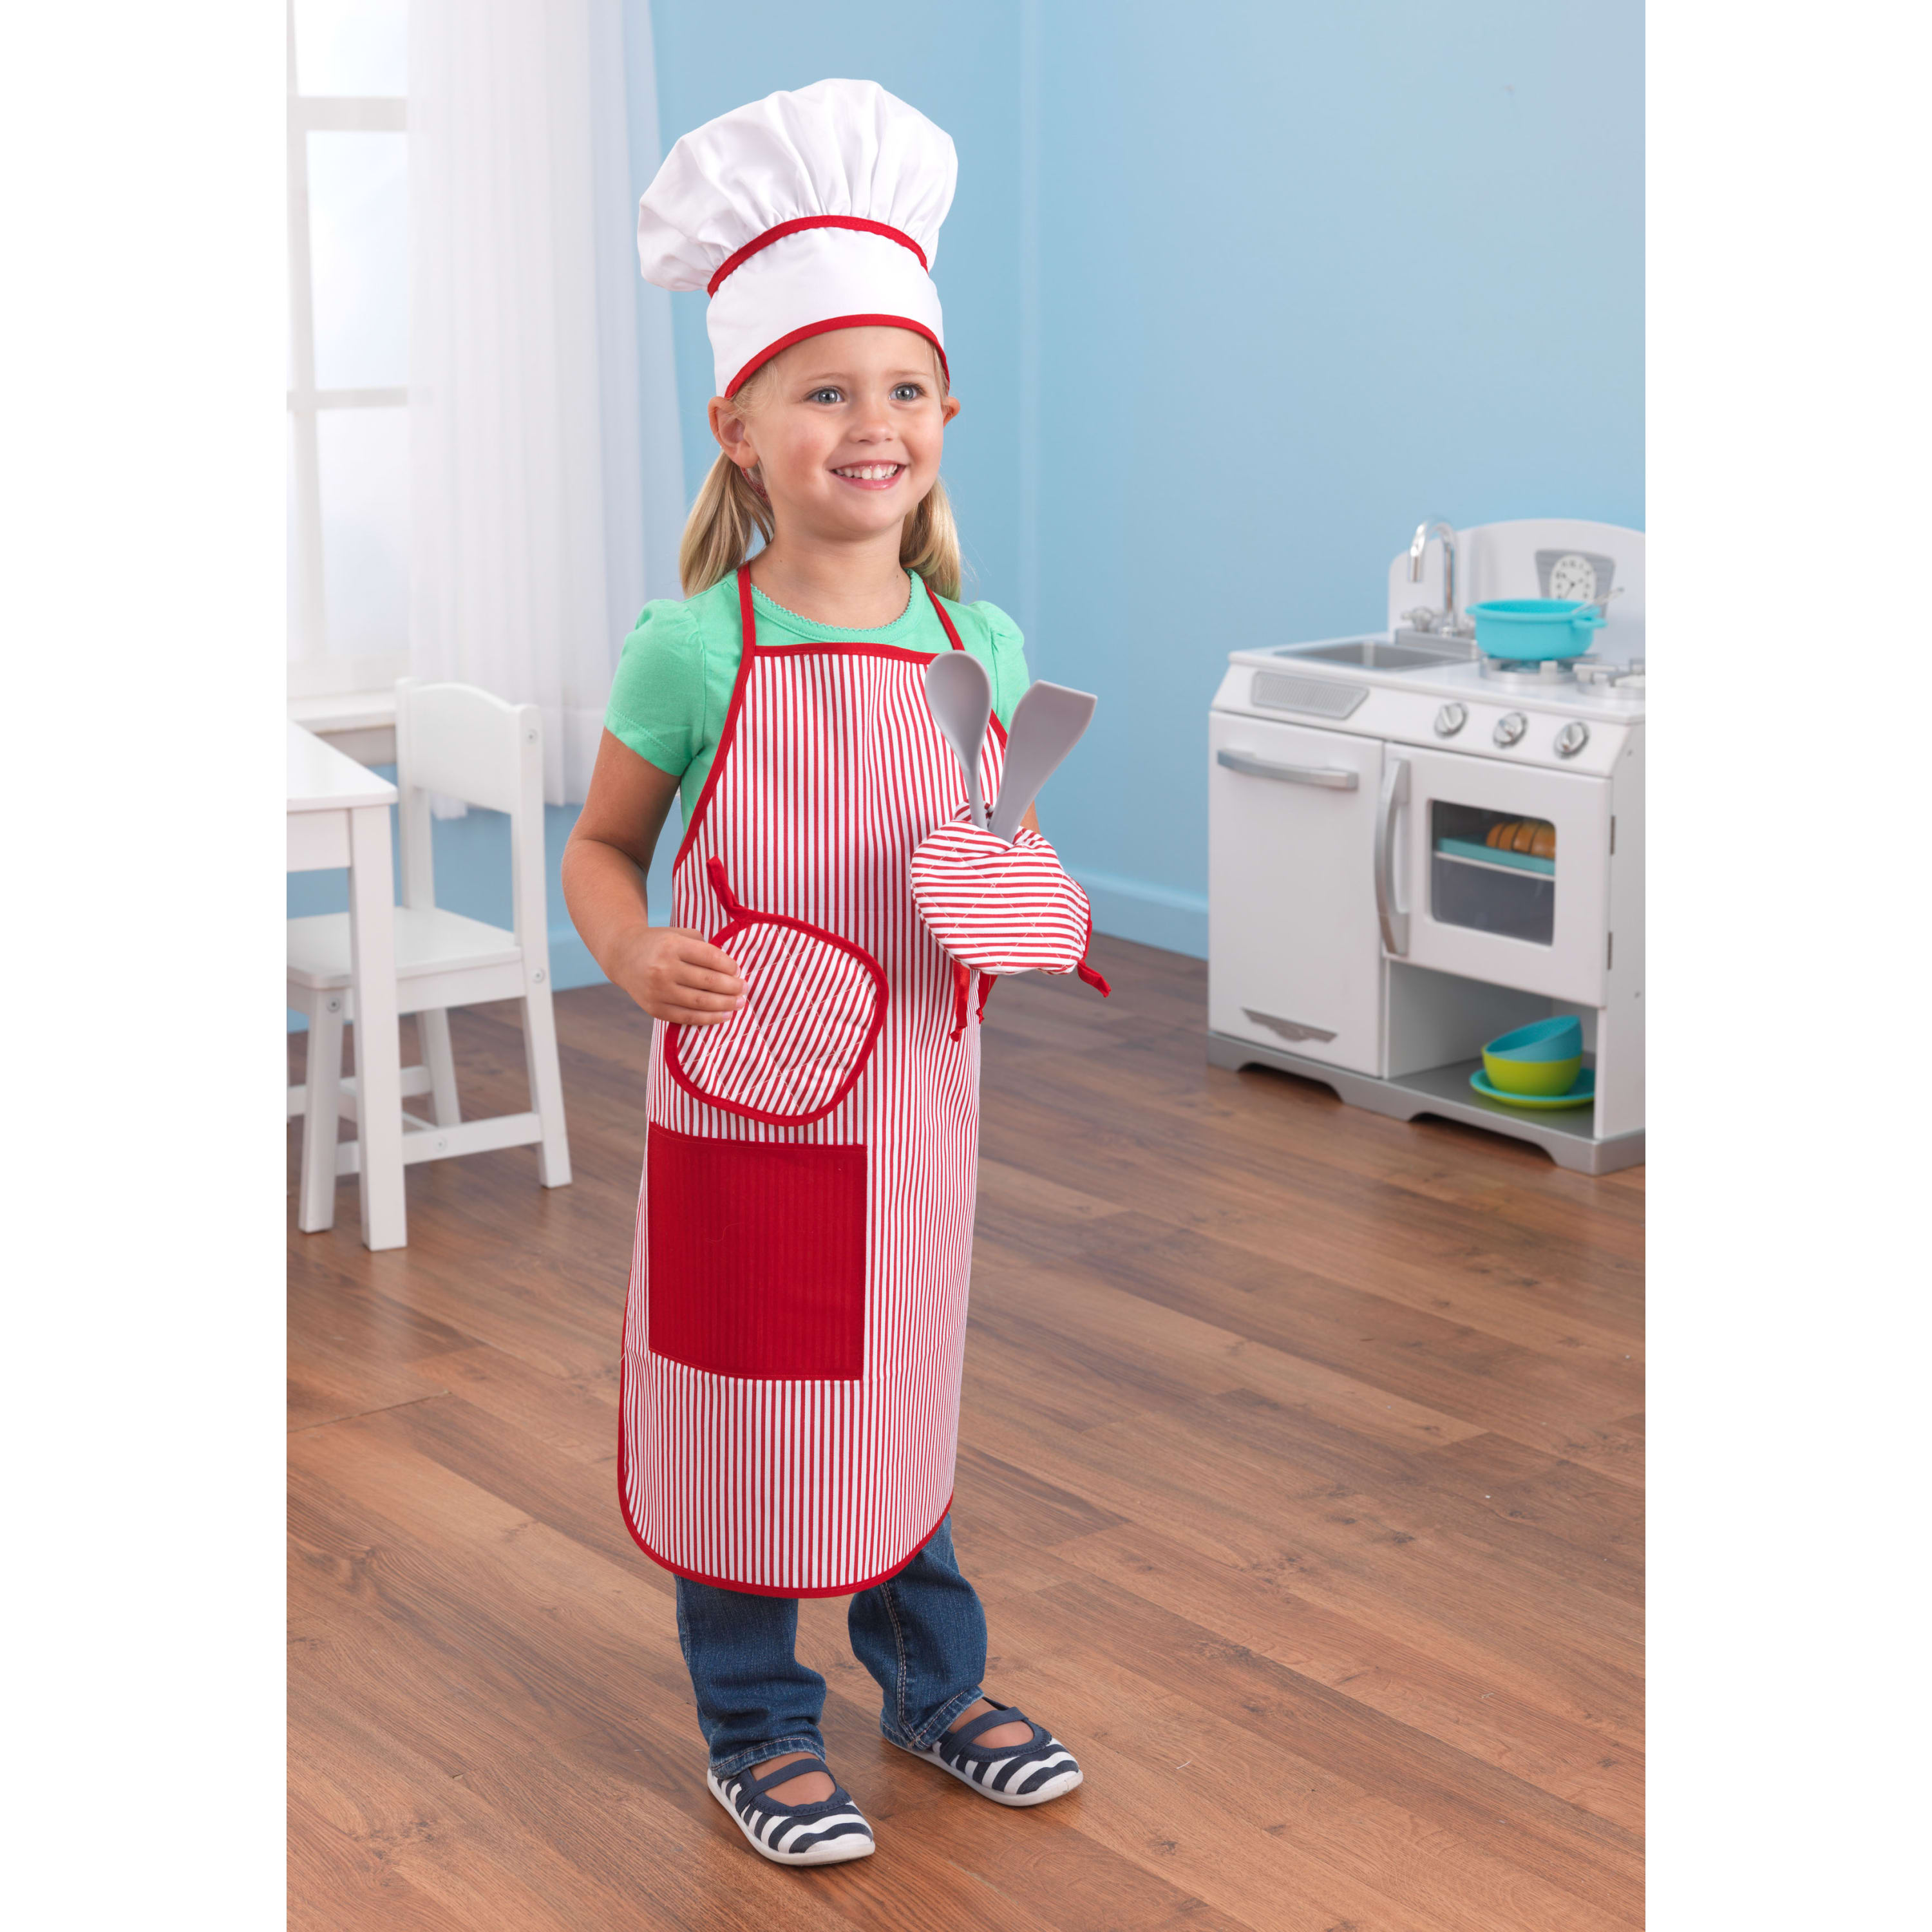 KidKraft Tasty Treats Chef Apron, Hat and Accessory Set for Kids - Red - image 4 of 4